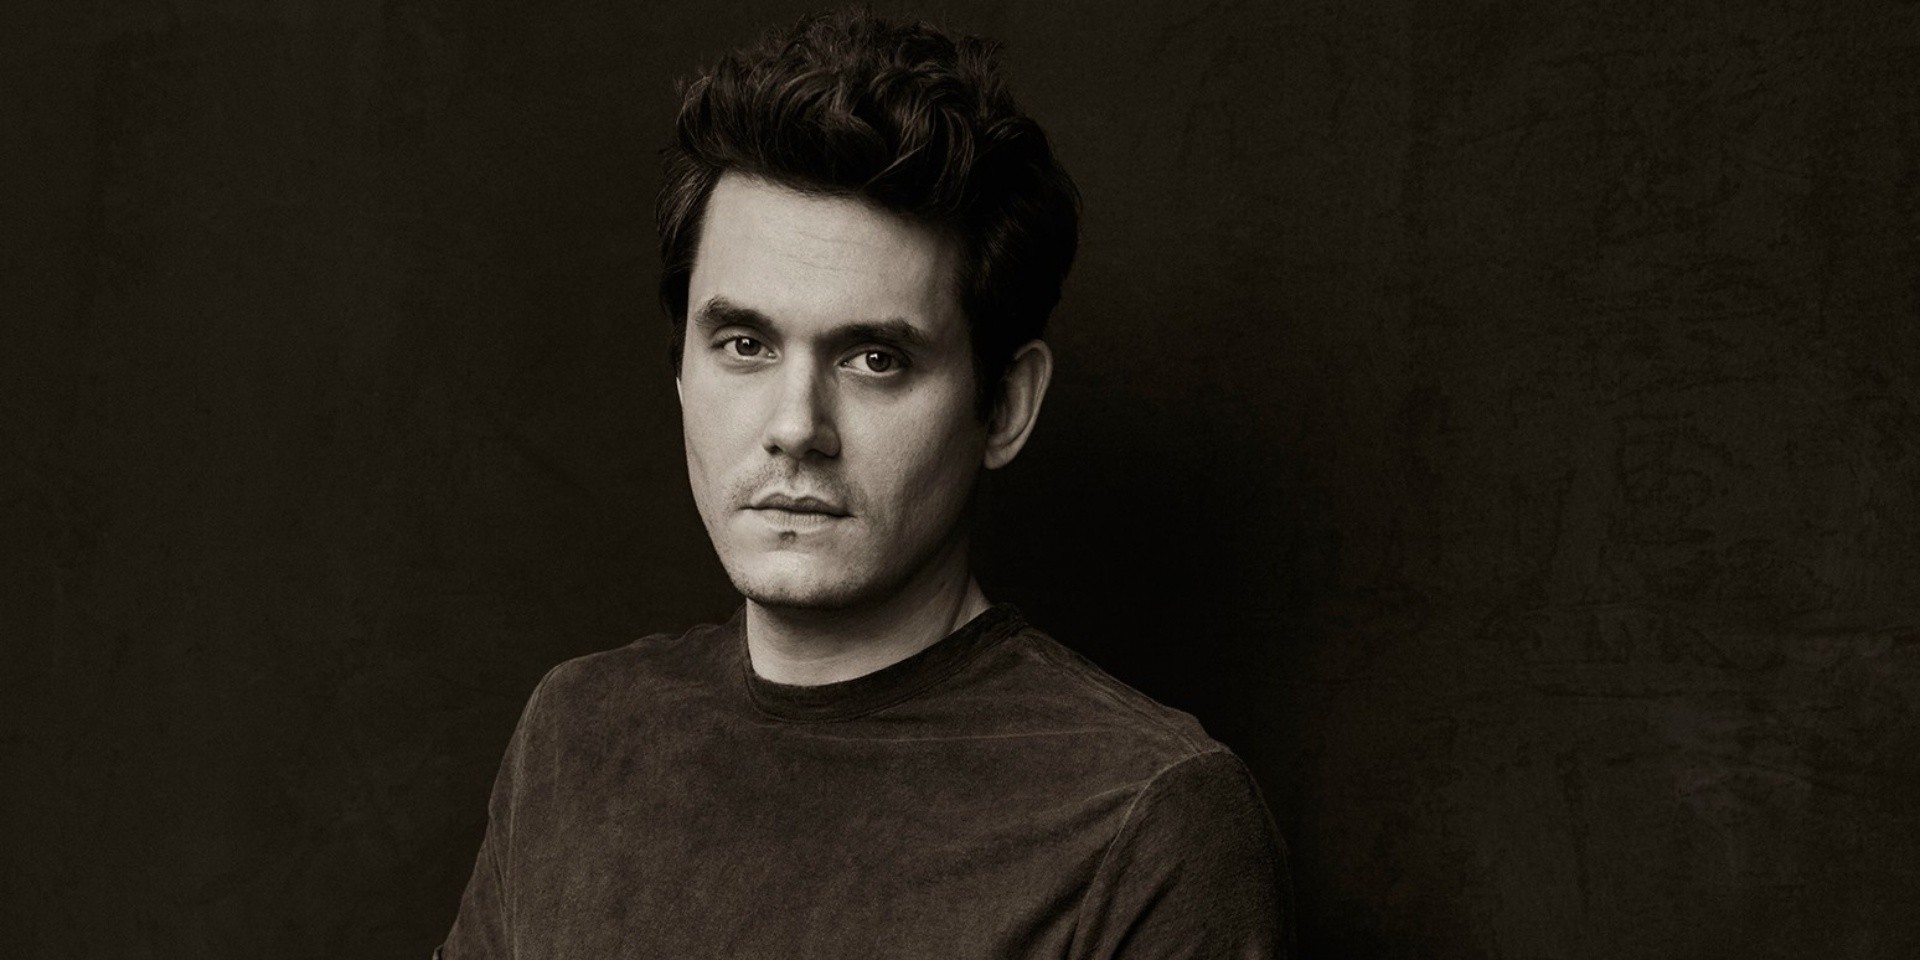 John Mayer's 'The Heart Of Life' to be adapted into new ABC drama series